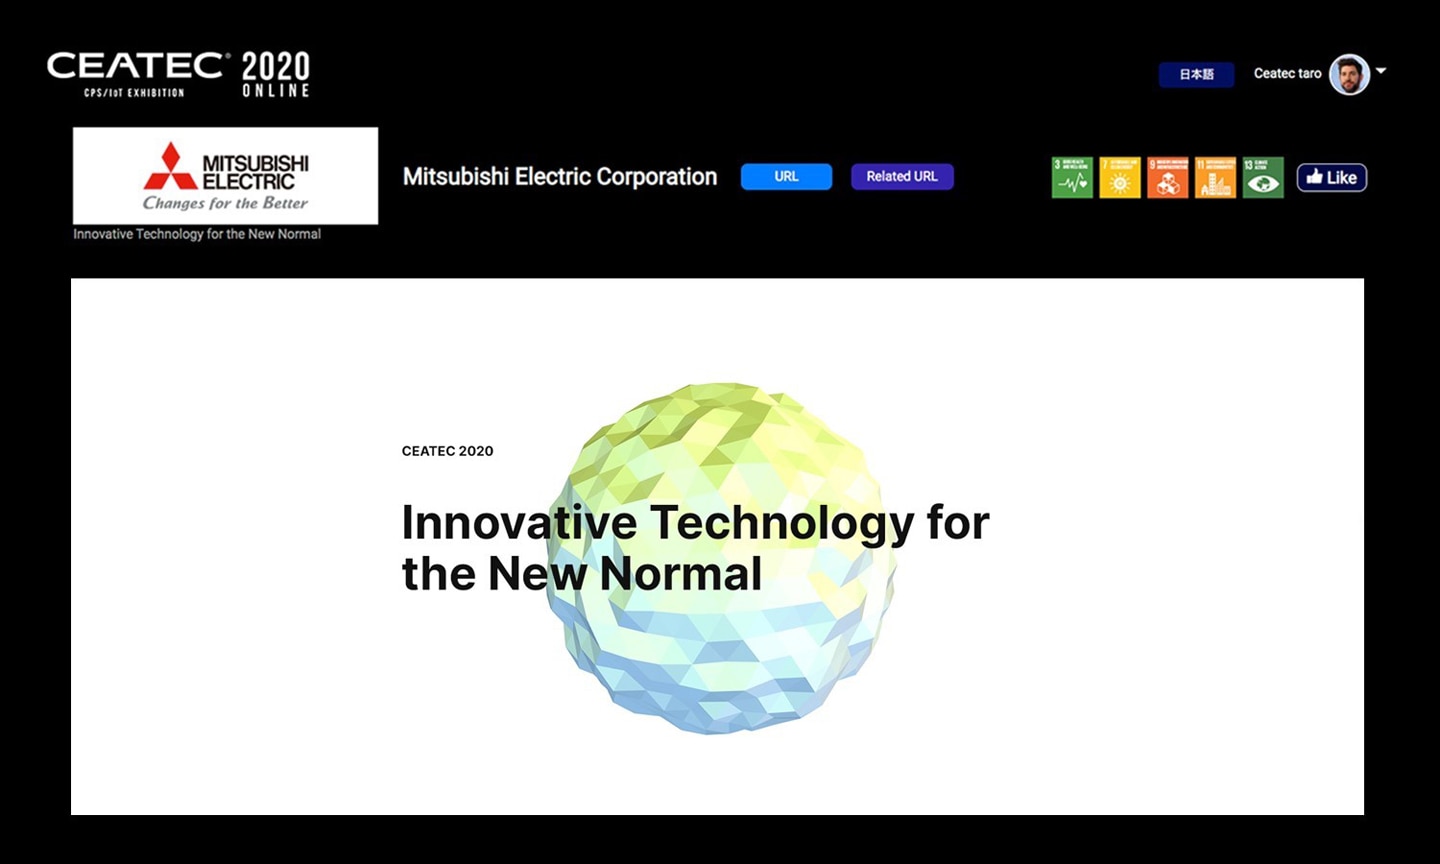 Mitsubishi Electric's page on CEATEC 2020 ONLINE website